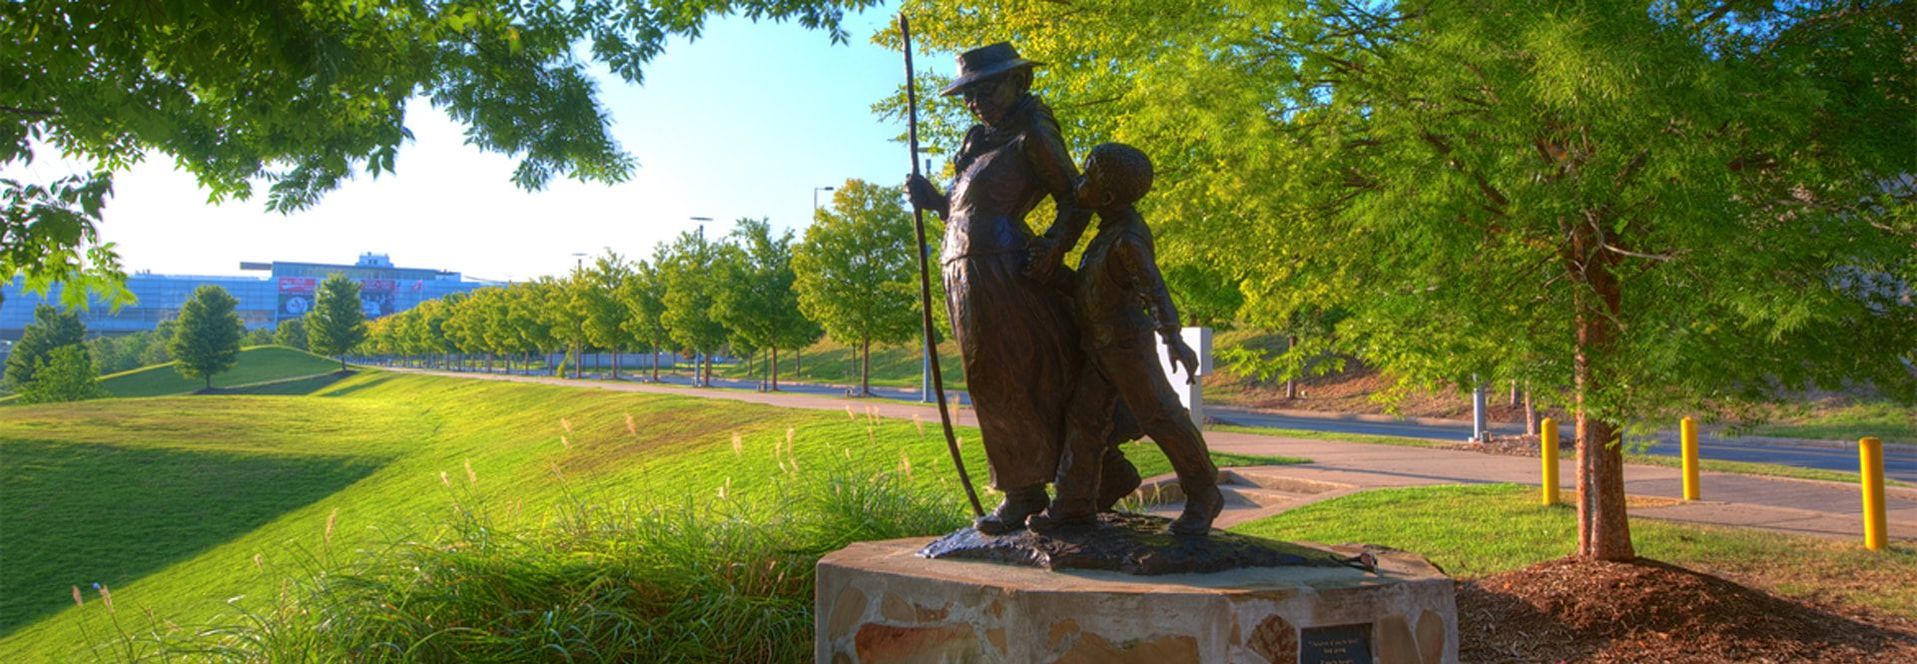 Here is a video we just ran across by a student digesting and discussing NSG Fellow Jane DeDecker’s Harriet Tubman sculpture that we placed in Little Rock in 2004, part of a series of sculptures that lead to the Clinton Presidential Center see more about our installation ​ Our sculpture placements continue to move and educate people. #PublicArt #FeedYourCreativeSpirit